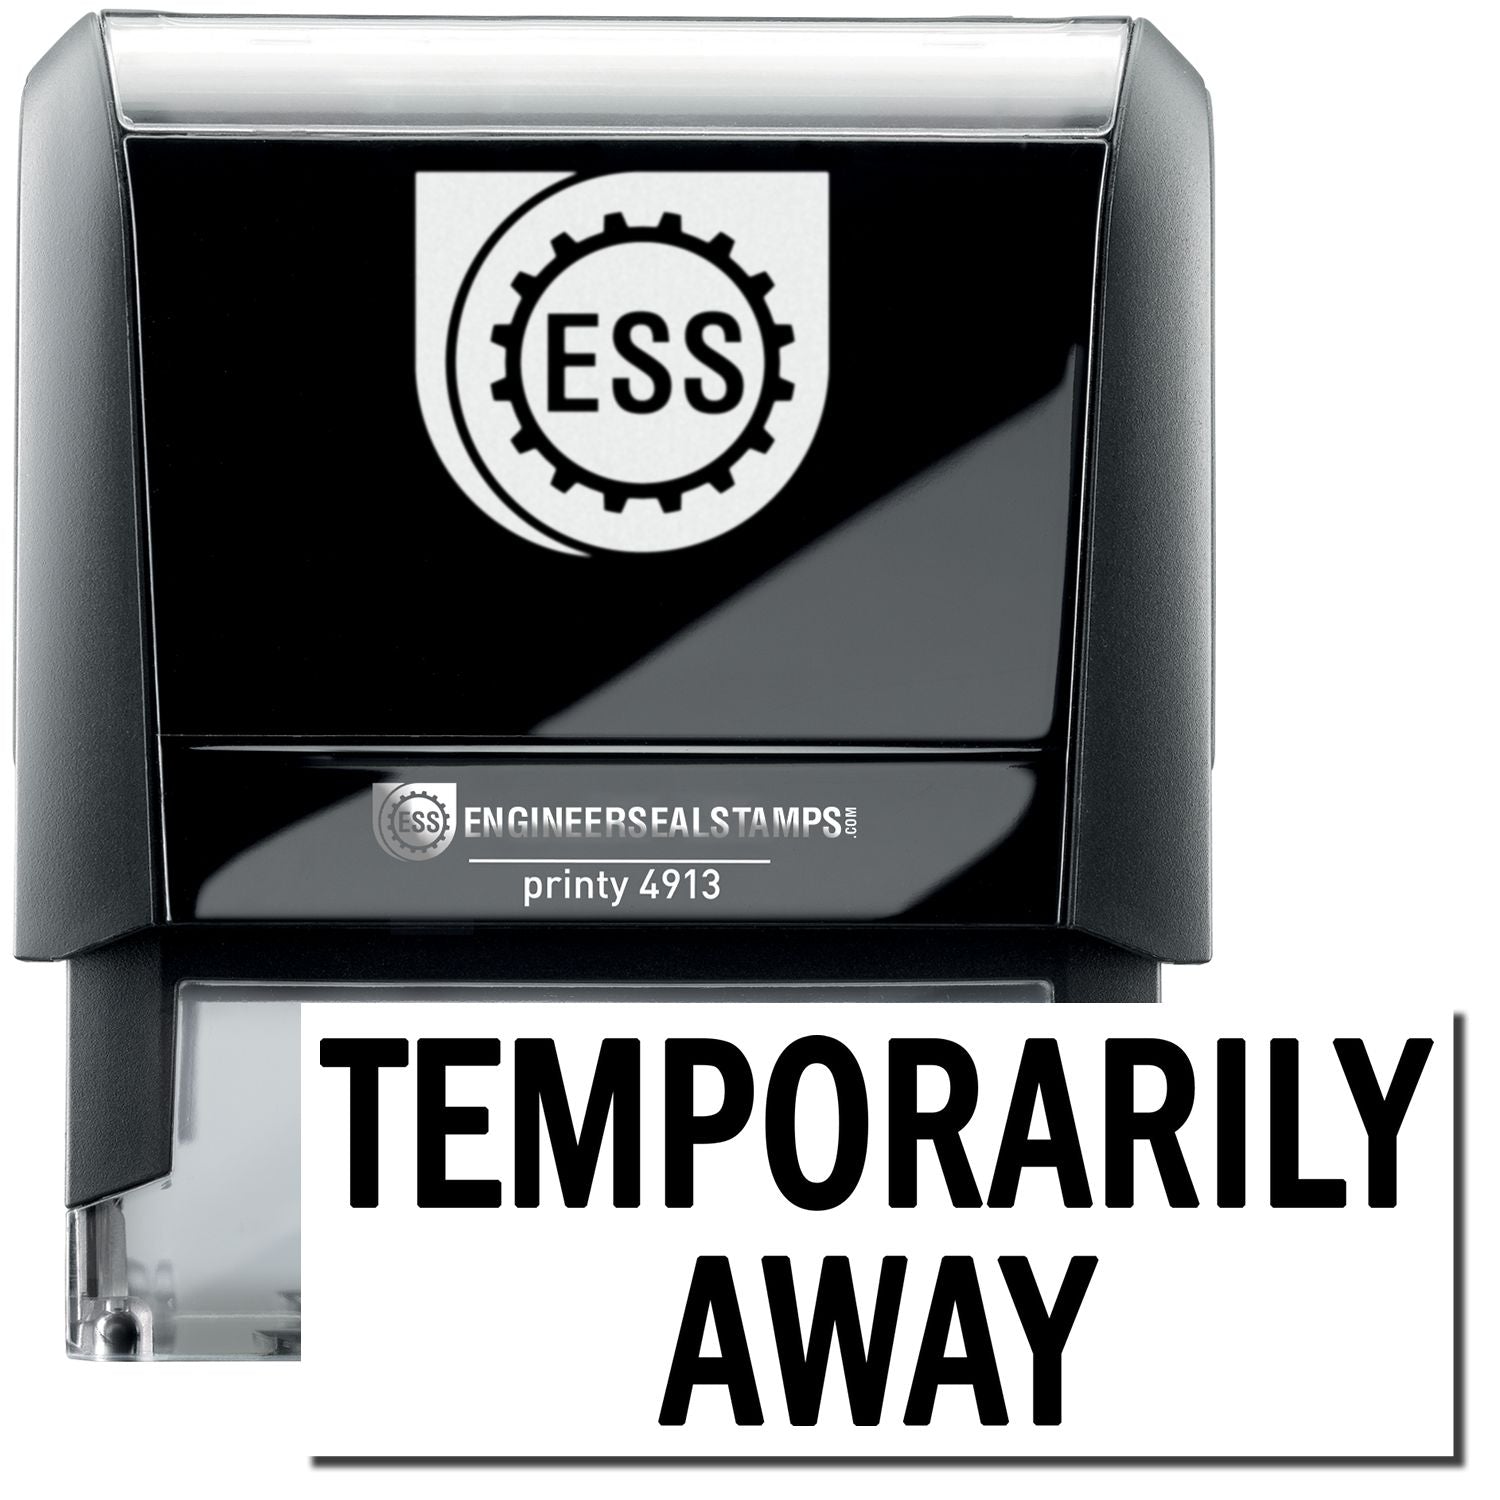 A self-inking stamp with a stamped image showing how the text "TEMPORARILY AWAY" in a large font is displayed by it after stamping.